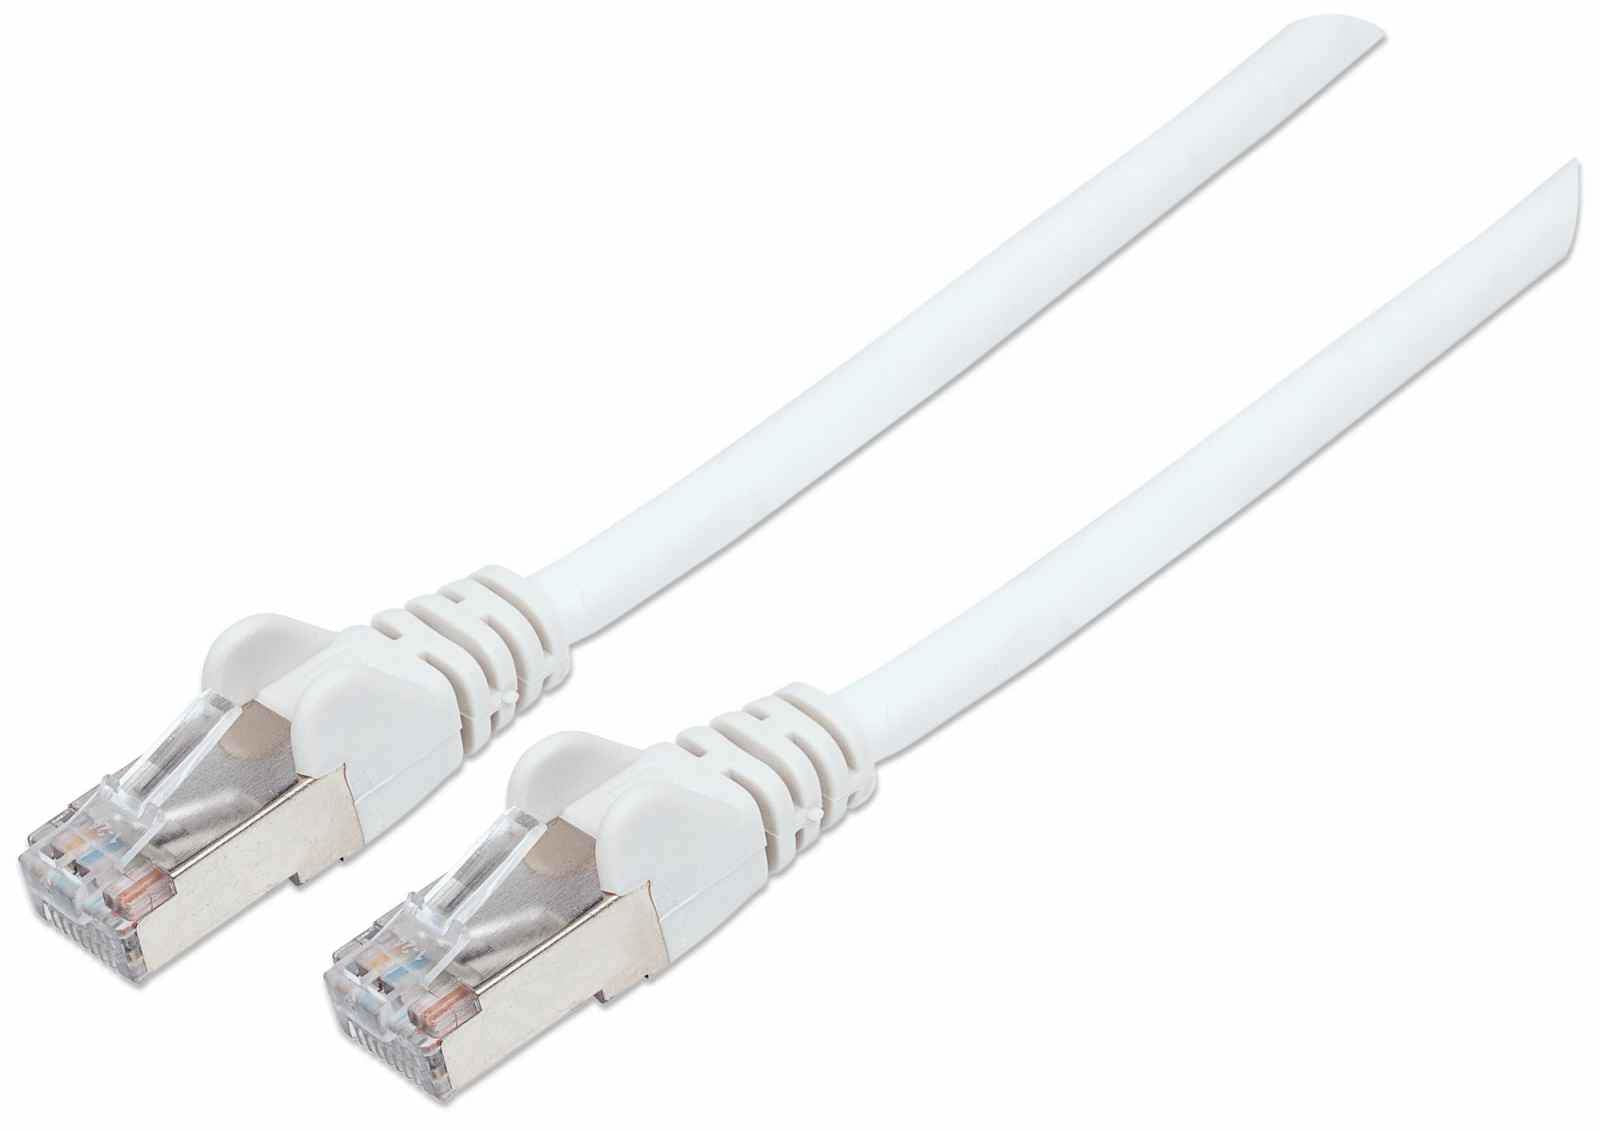 Intellinet Network Patch Cable, Cat7 Cable/Cat6A Plugs, 5m, White, Copper, S/FTP, LSOH / LSZH, PVC, RJ45, Gold Plated Contacts, Snagless, Booted, Lifetime Warranty, Polybag